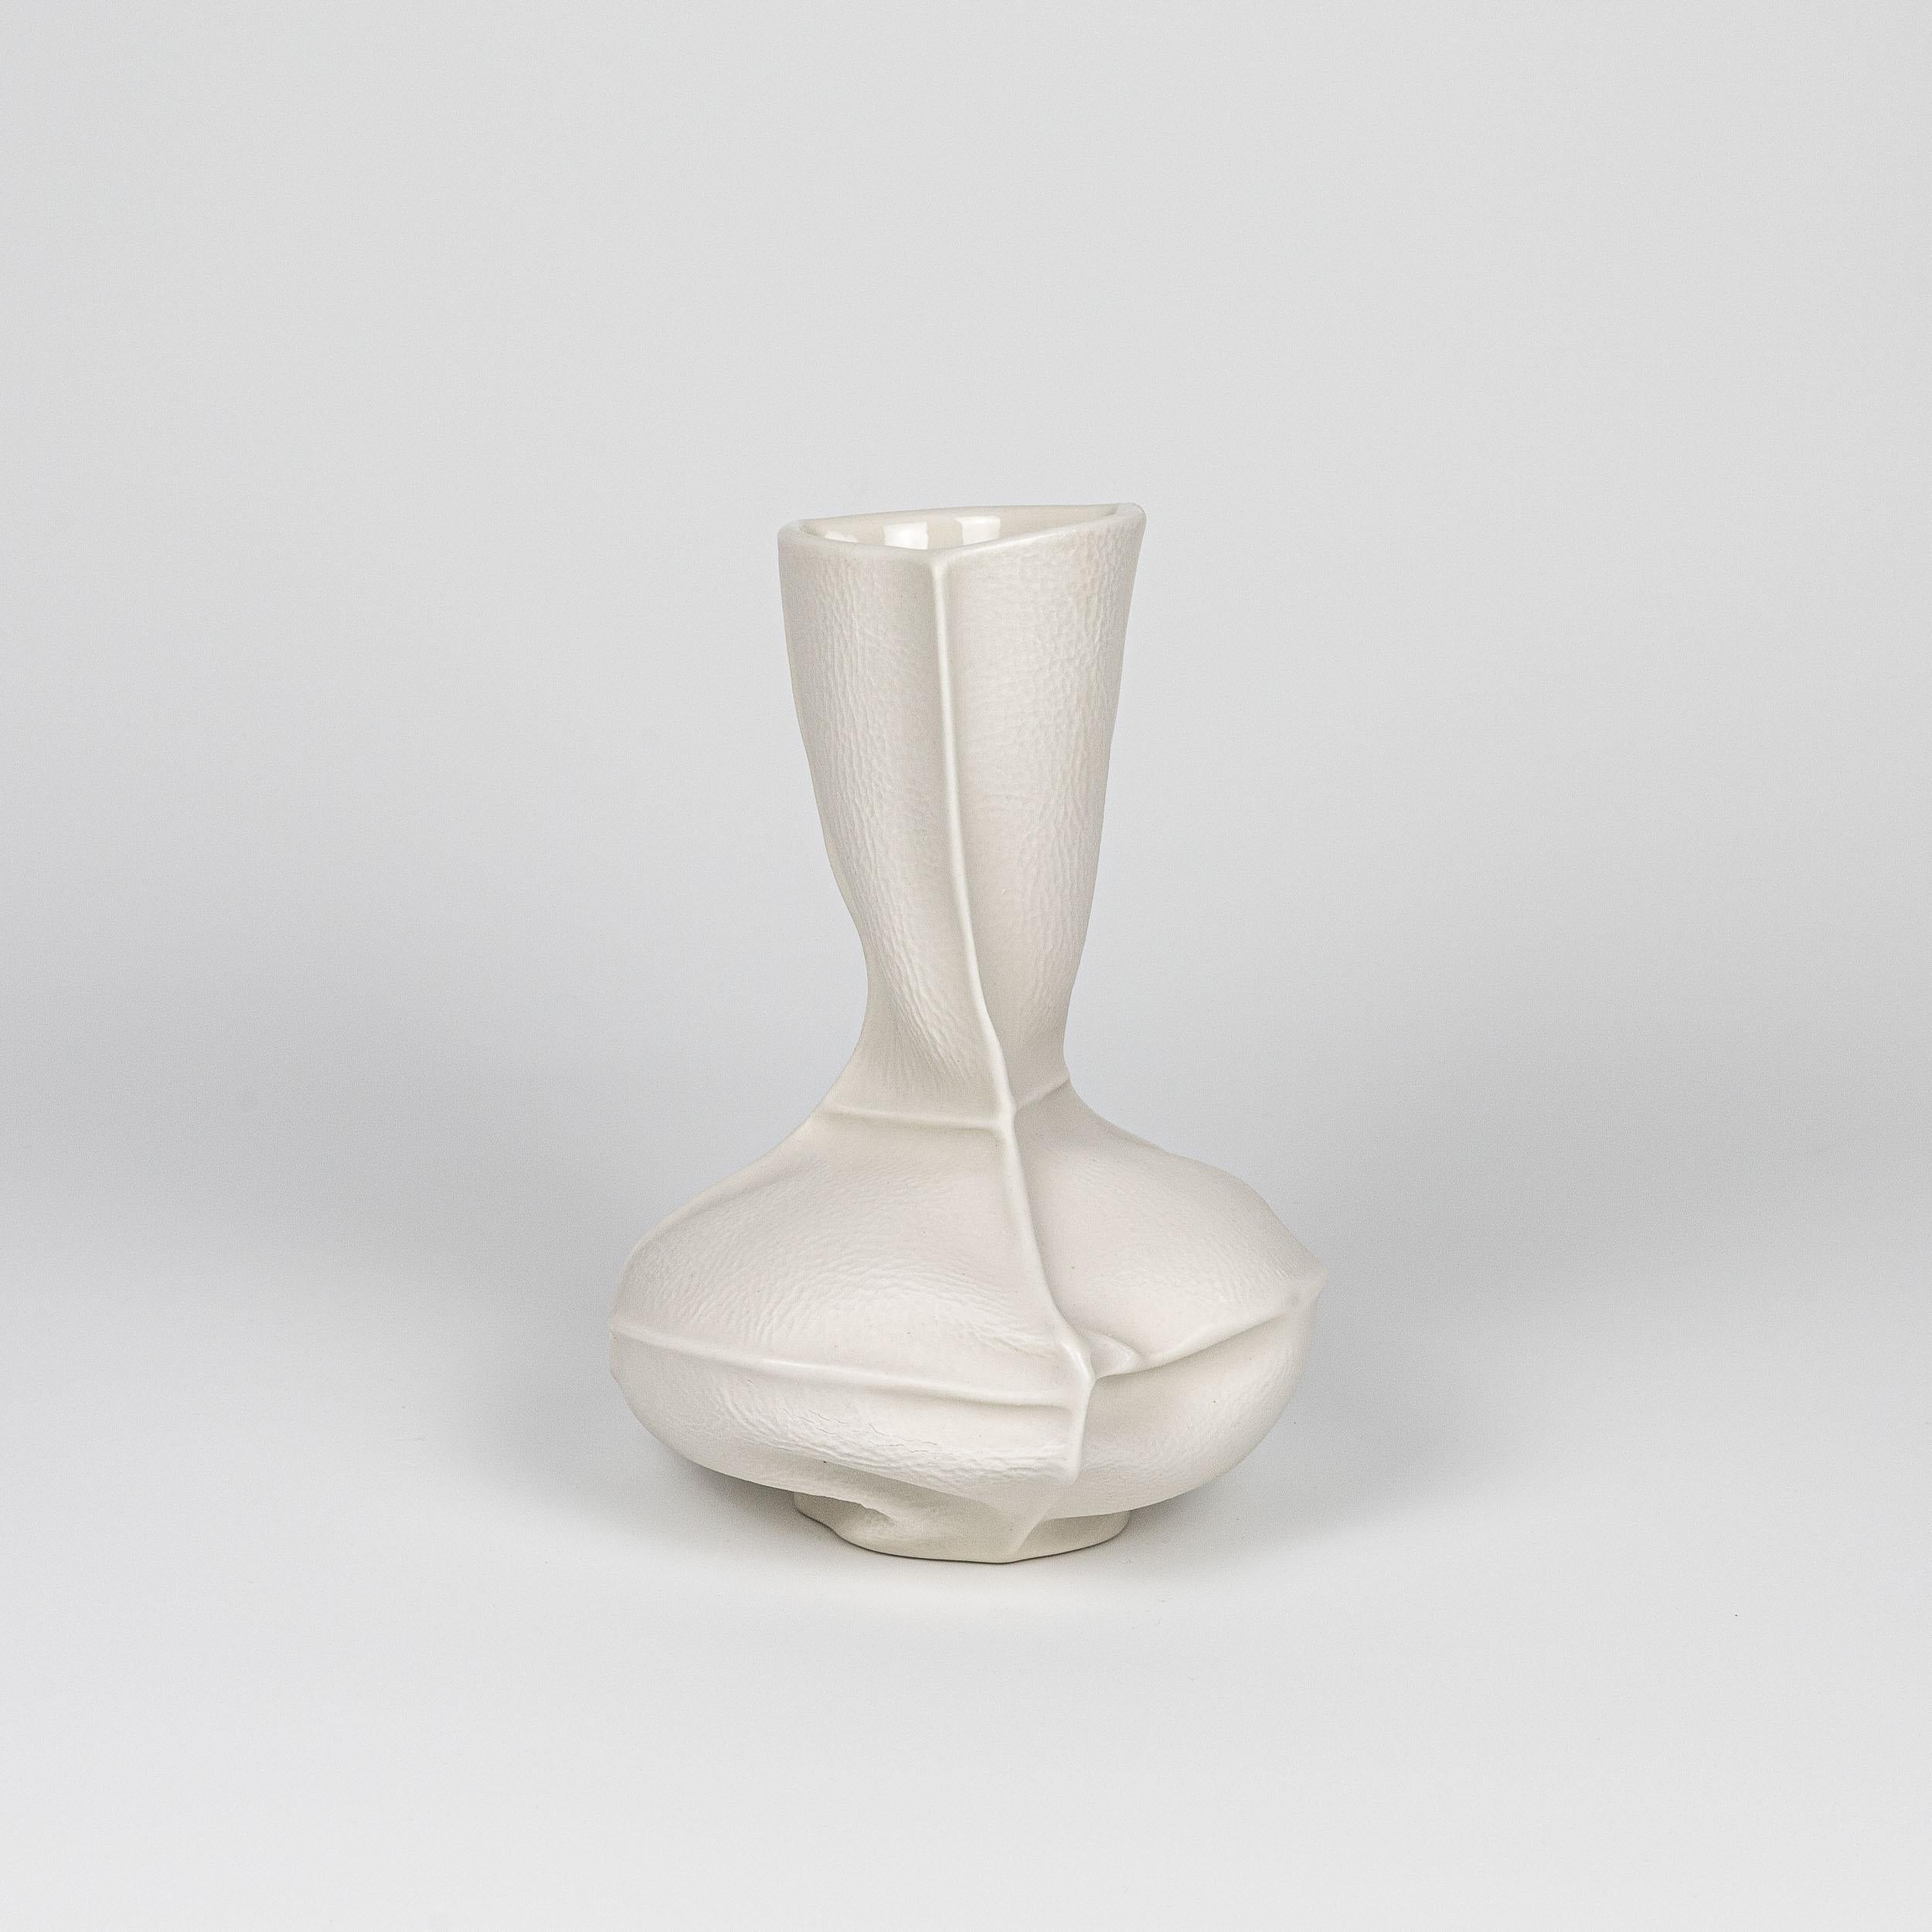 A porcelain flower vase with an organic form and texture, made by casting liquid porcelain in sewn leather molds. Clear glaze applied on interior surface. As a result of the production process each vase is one-of-a-kind. 

Dimensions
5.5